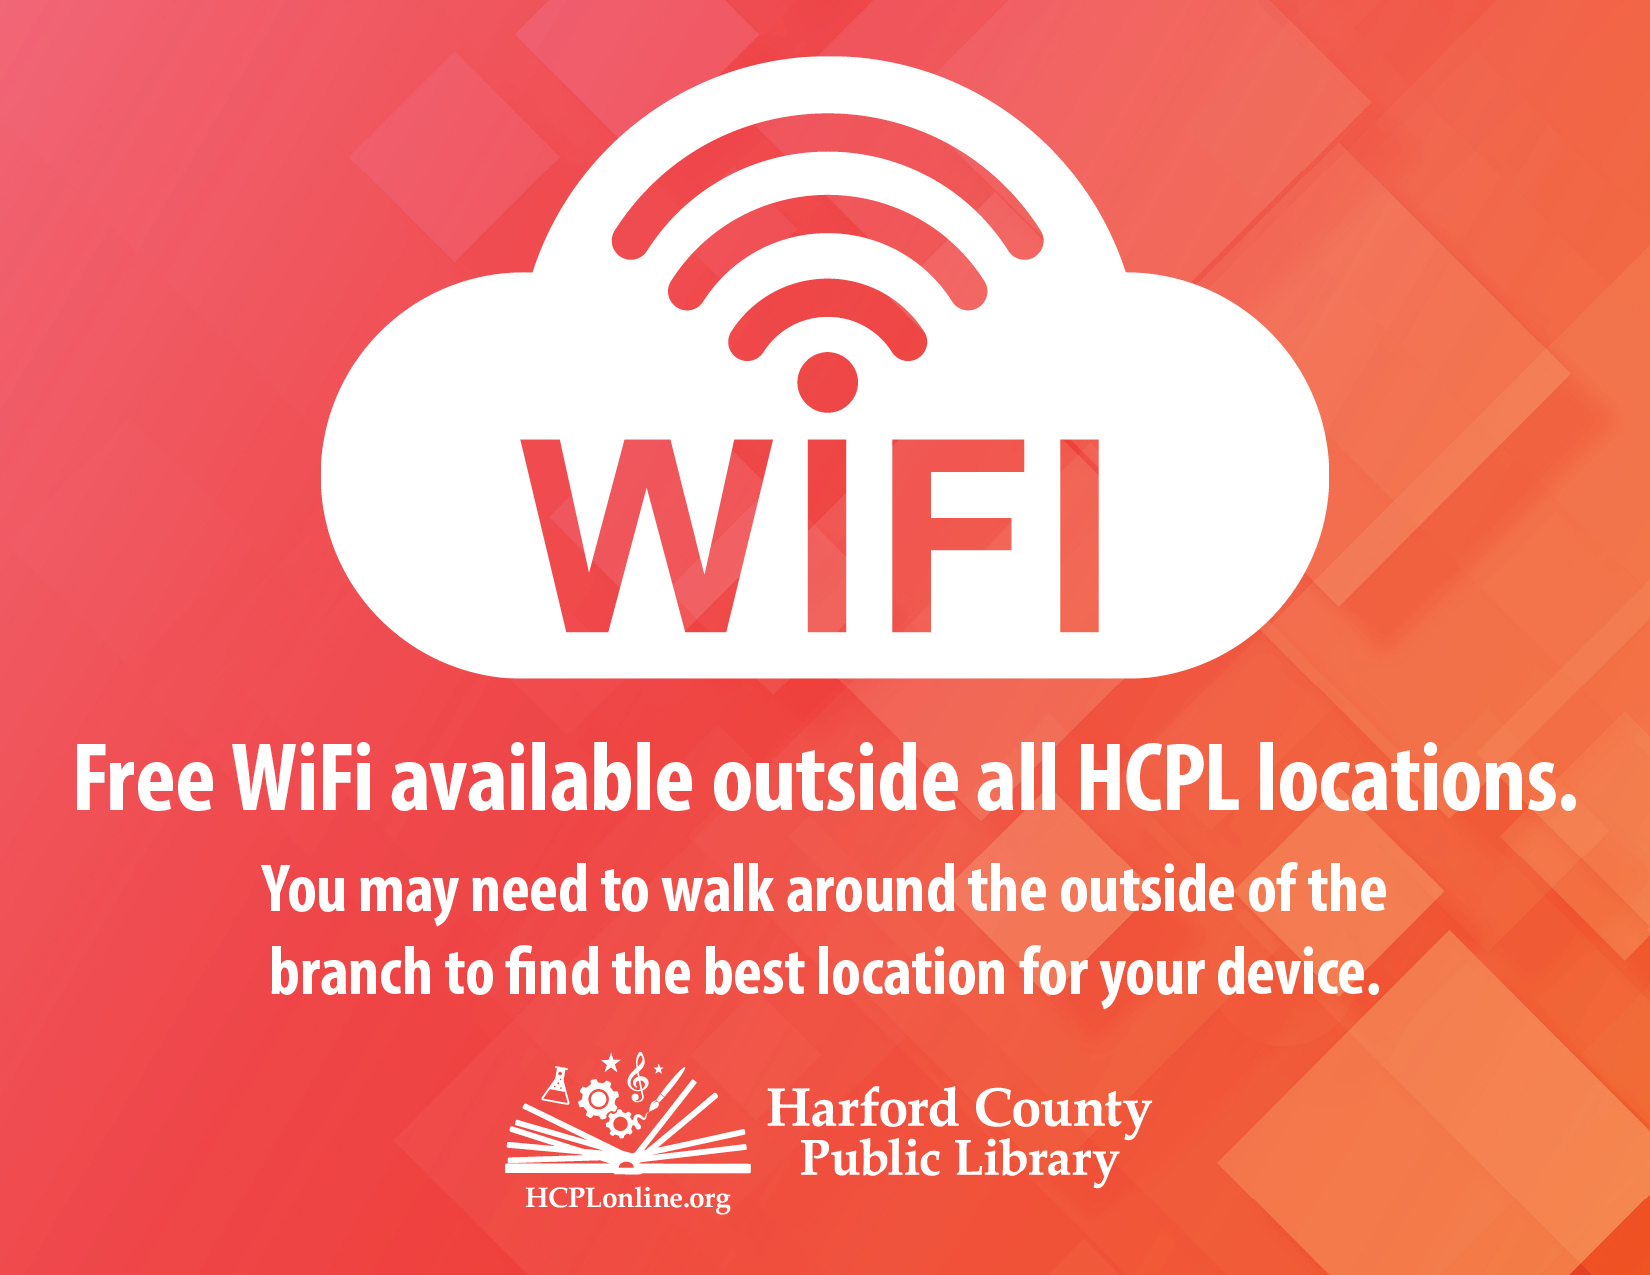 does public library have free wifi?